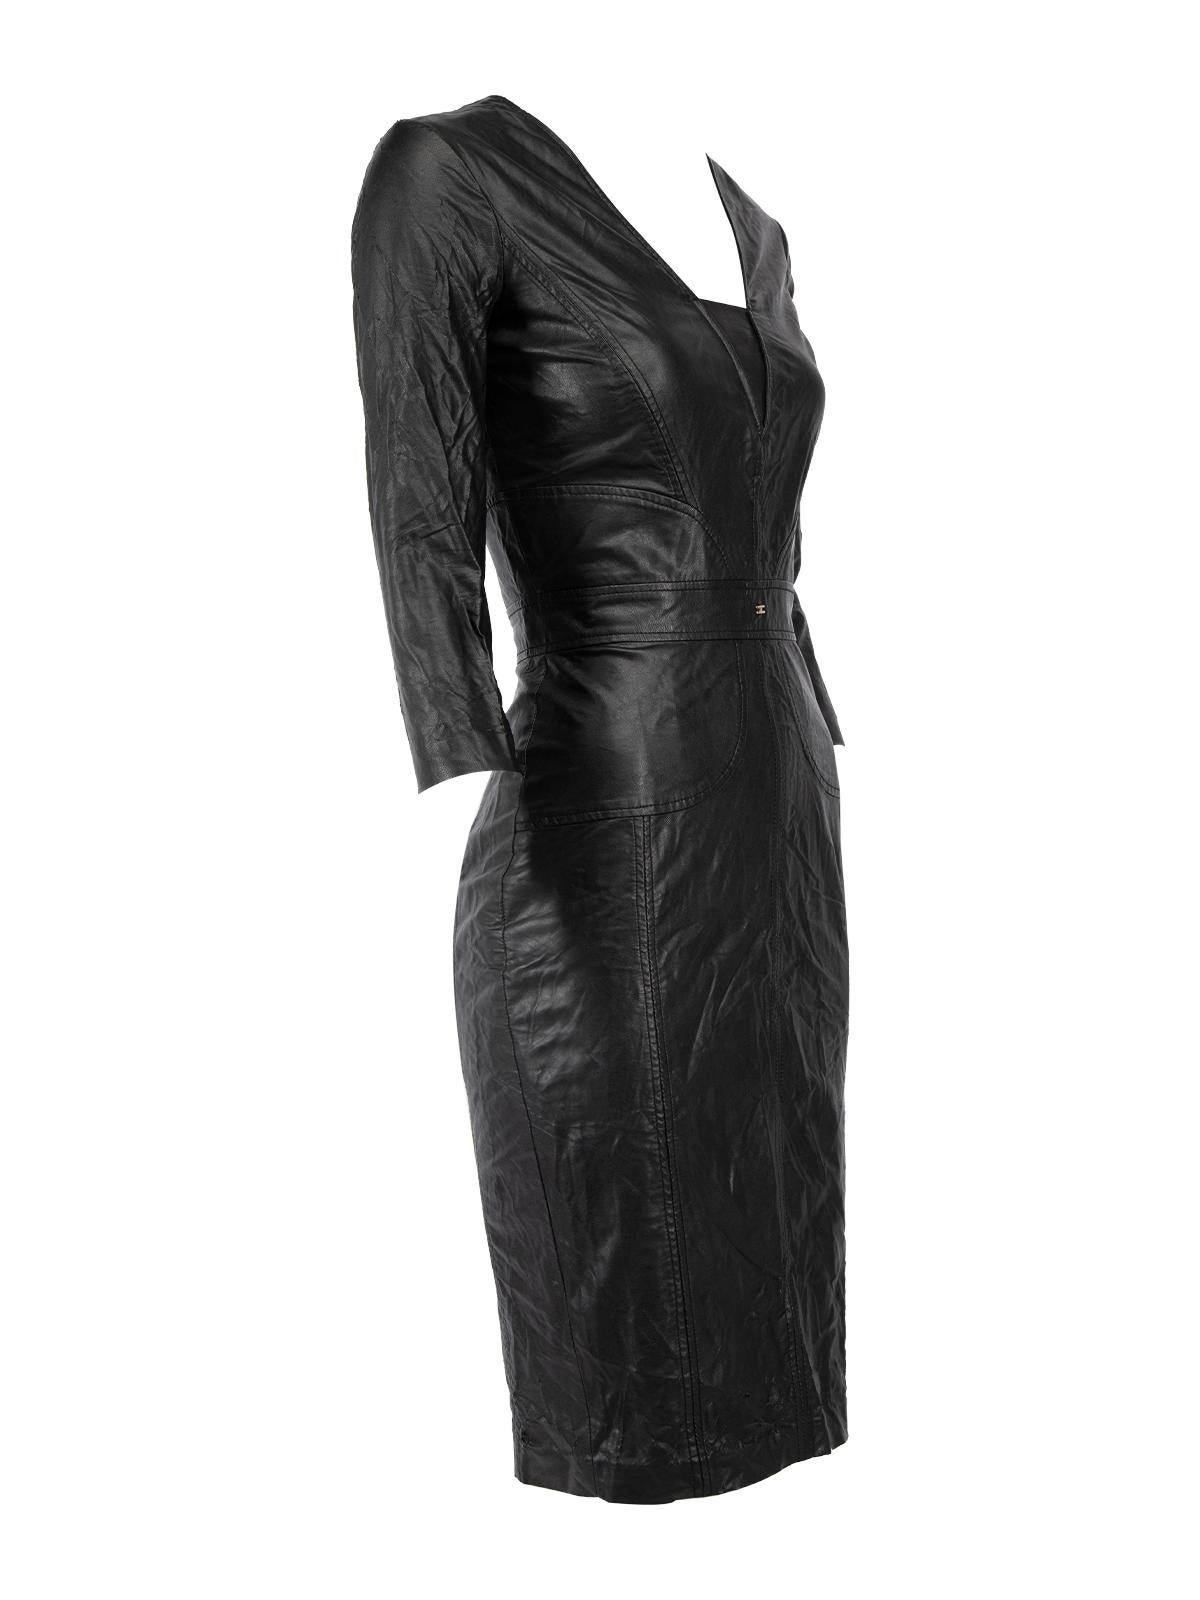 CONDITION is Very good. Minimal wear to dress is evident. Loose threads at the back slit seams and some wear/ early signs of leather fabric peeling in some areas on this used Elisabetta Franchi designer resale item. Details Black Viscose with